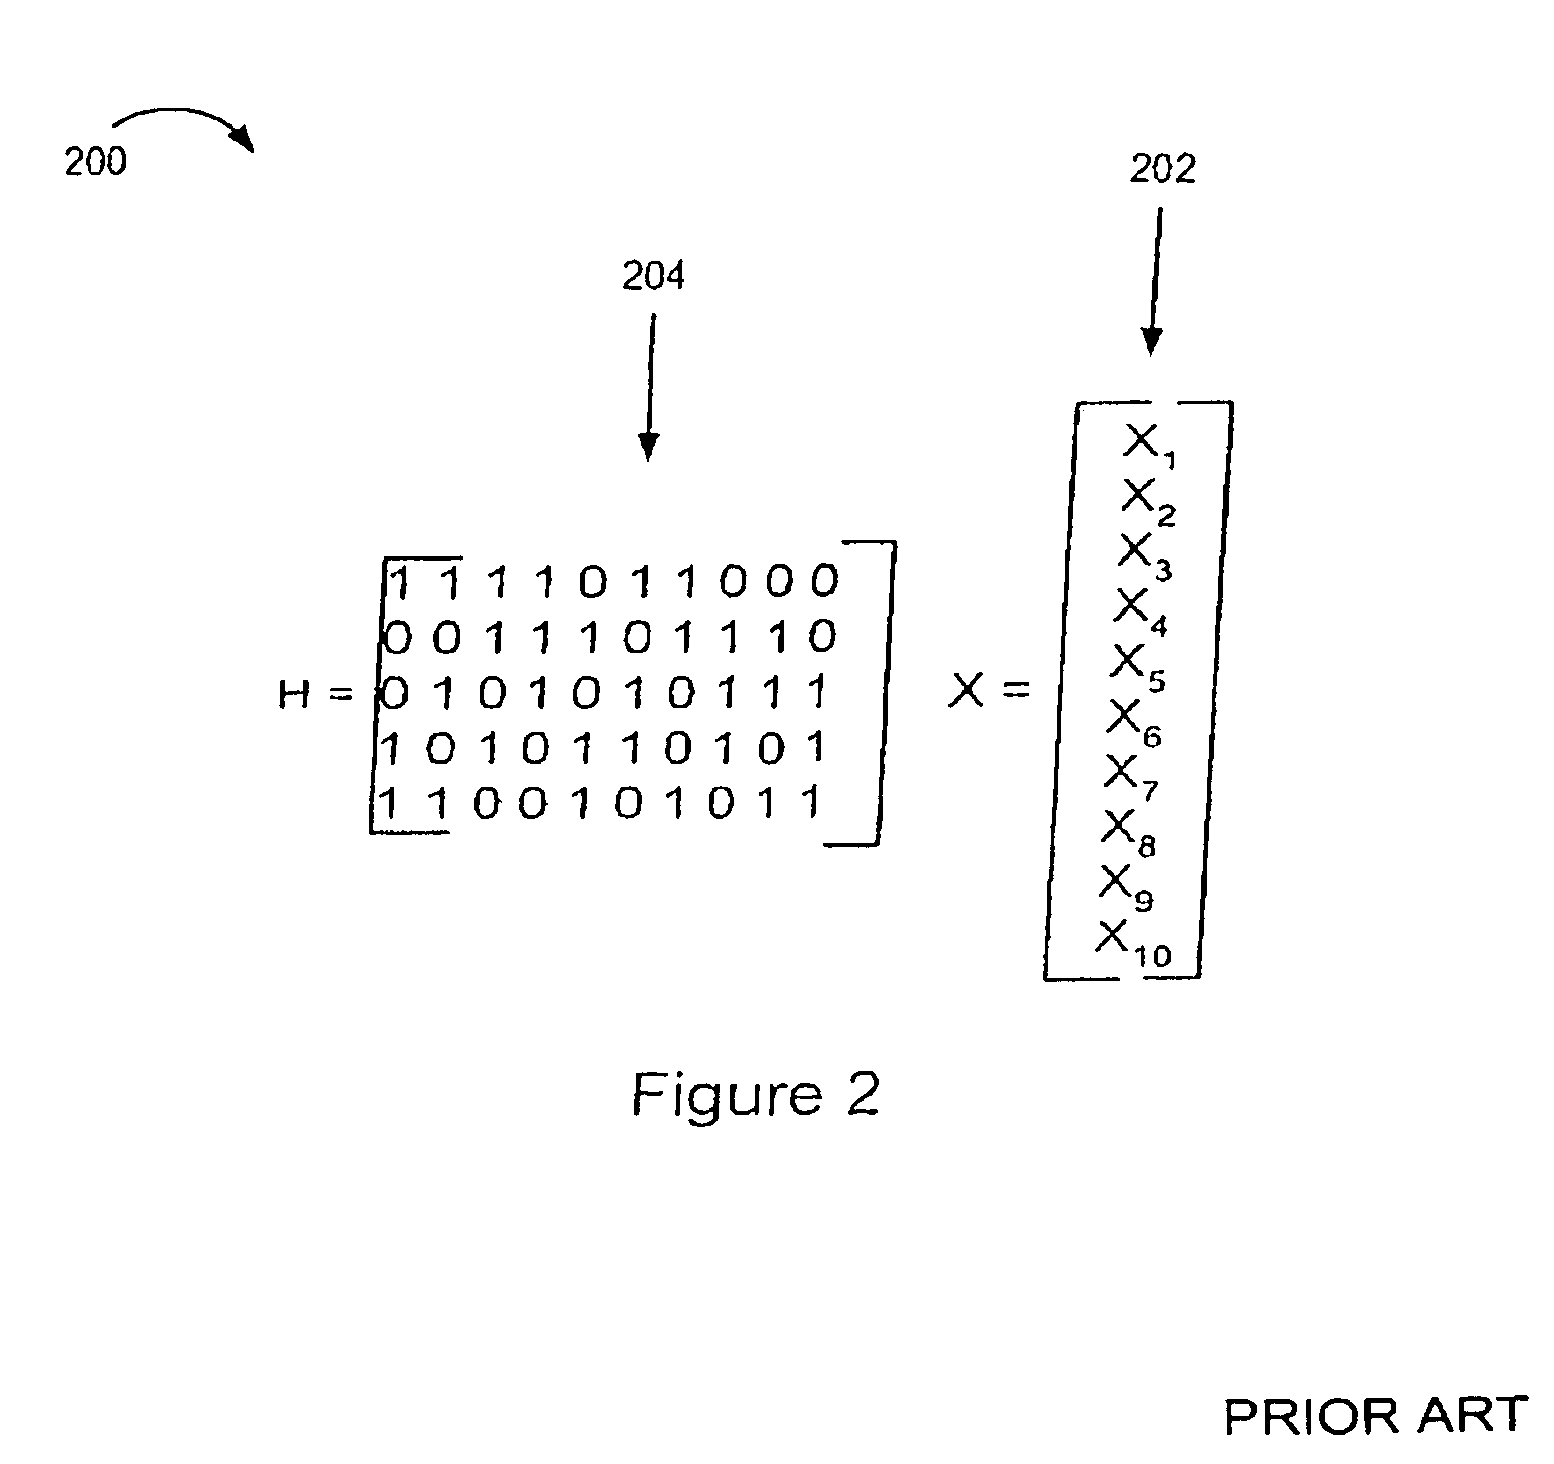 Methods and apparatus for reducing error floors in message passing decoders